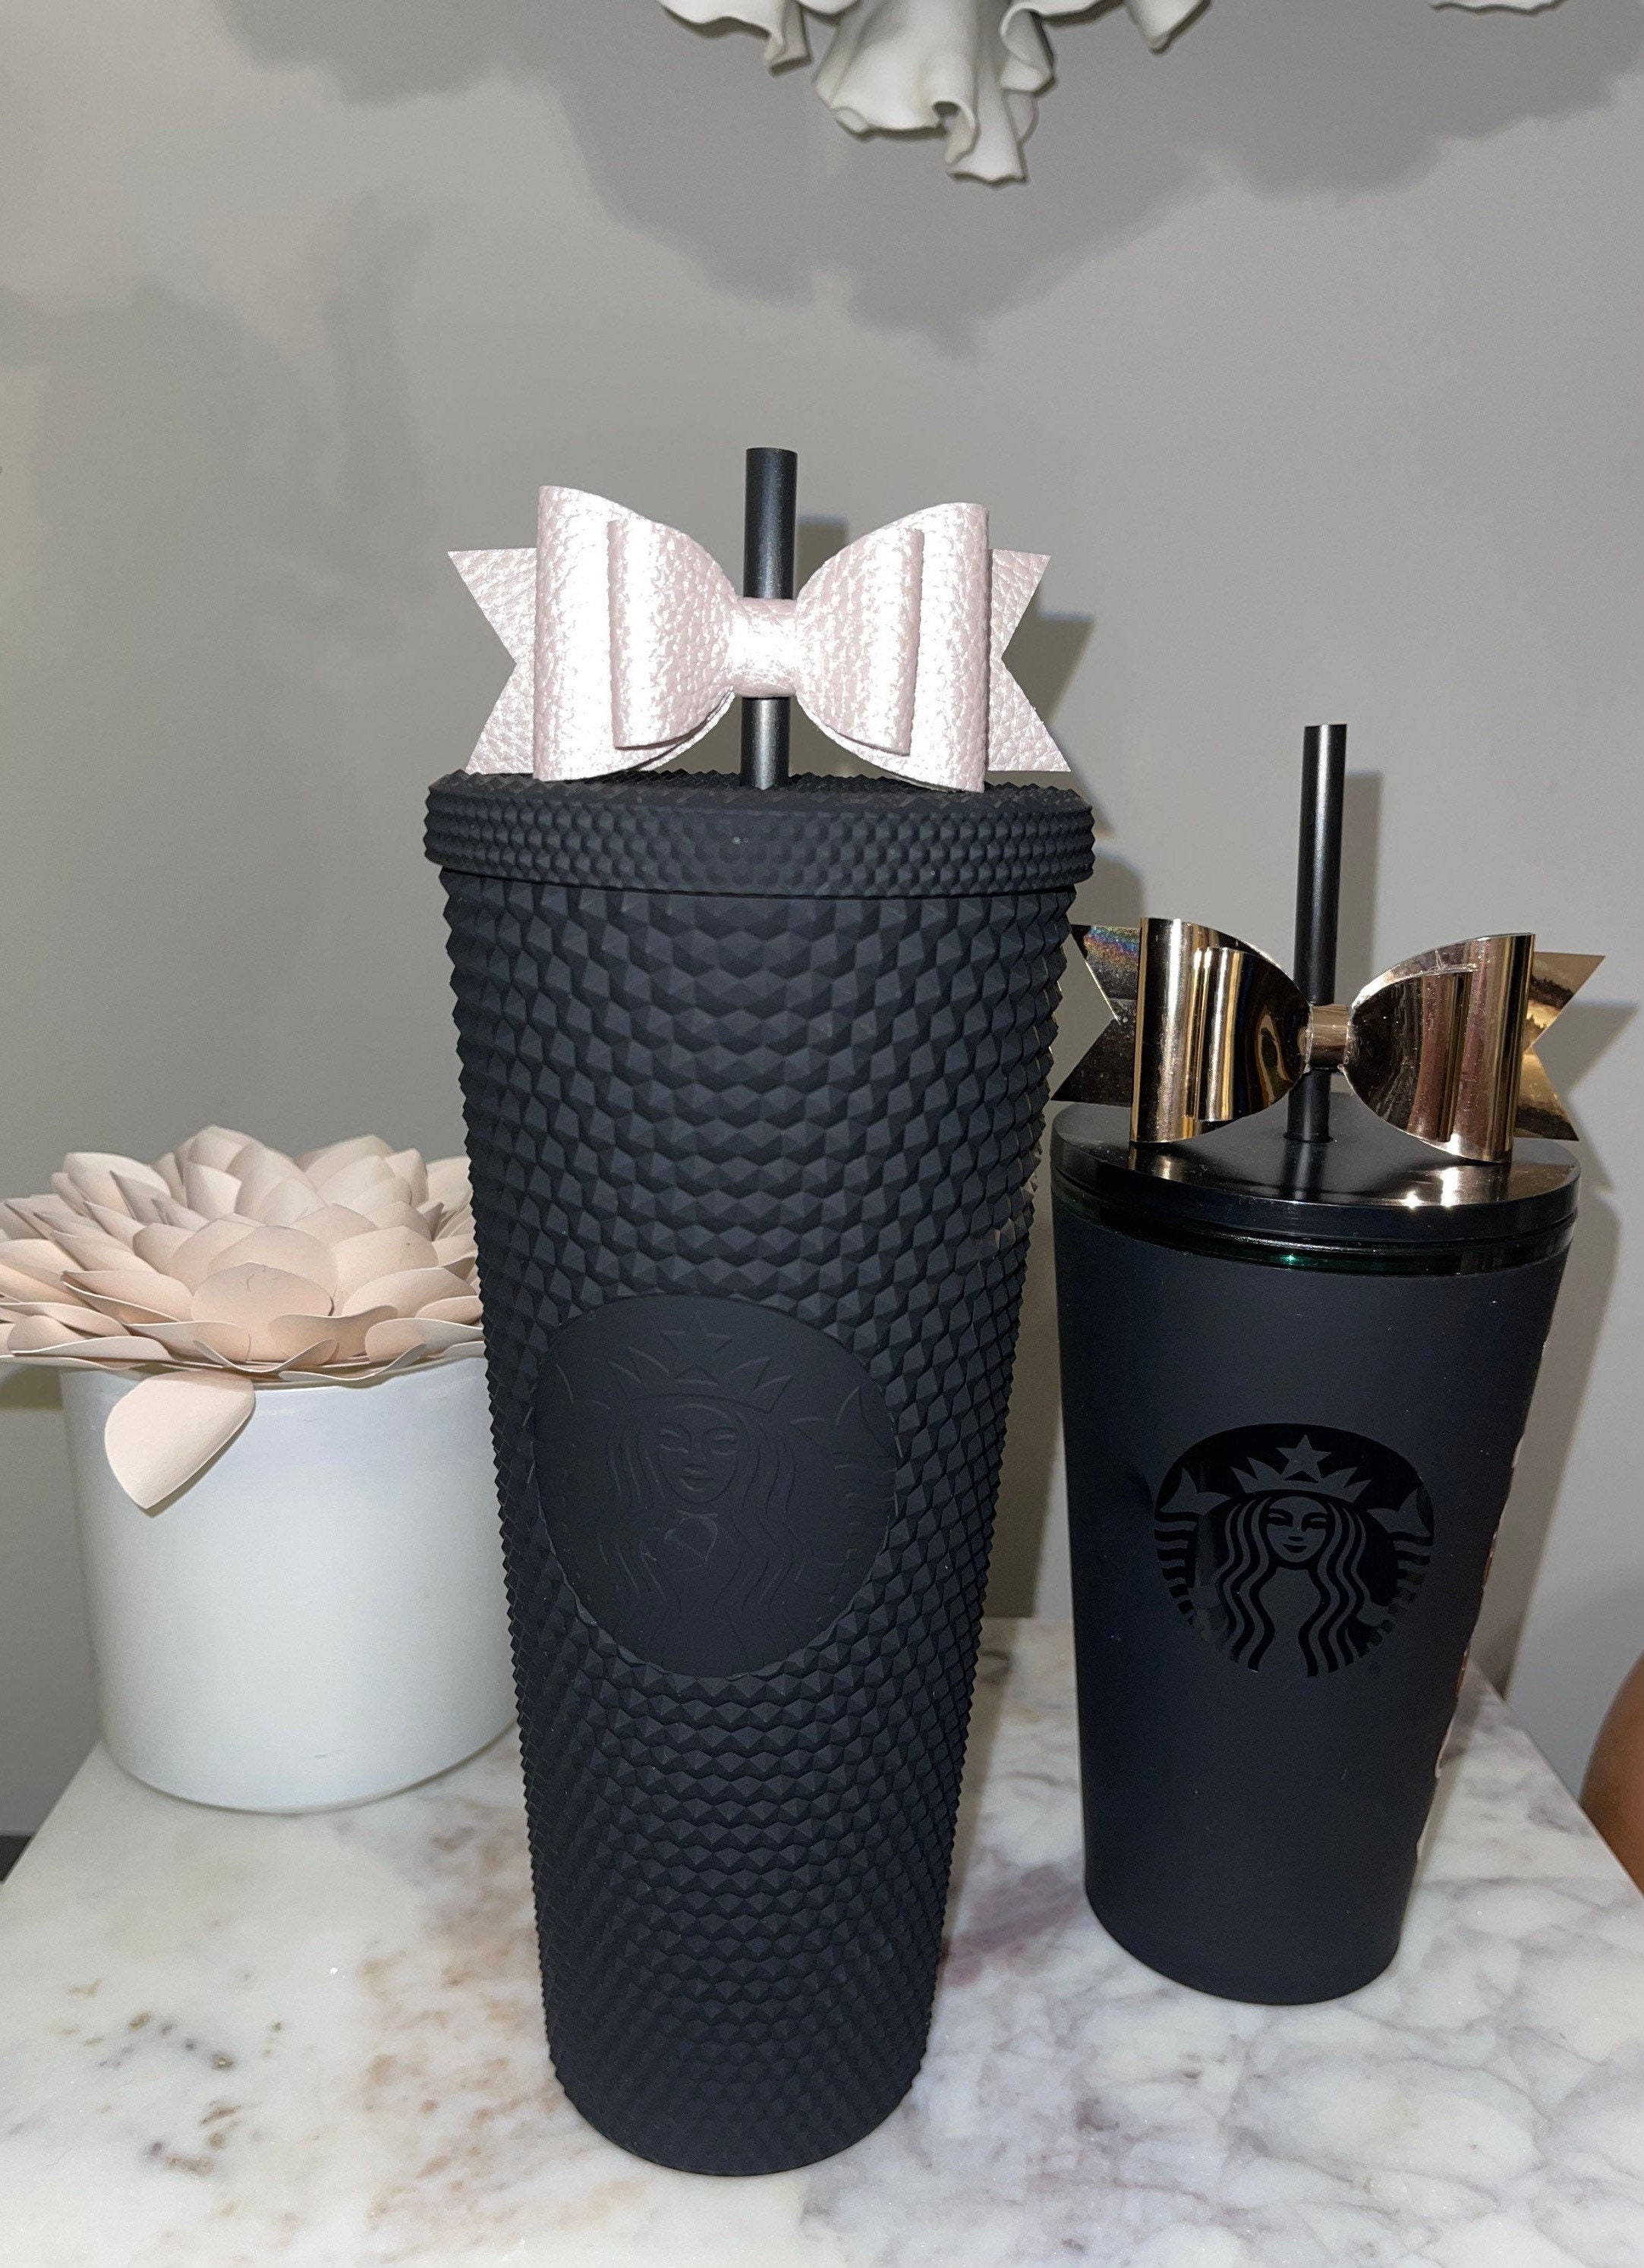 Bow Straws, Pink Straw Bow Topper, Straw Bow for Studded Pink Matte  Tumblers, Straw Bow for Tumblers, Bows for Starbucks Cups, Bow Topper 